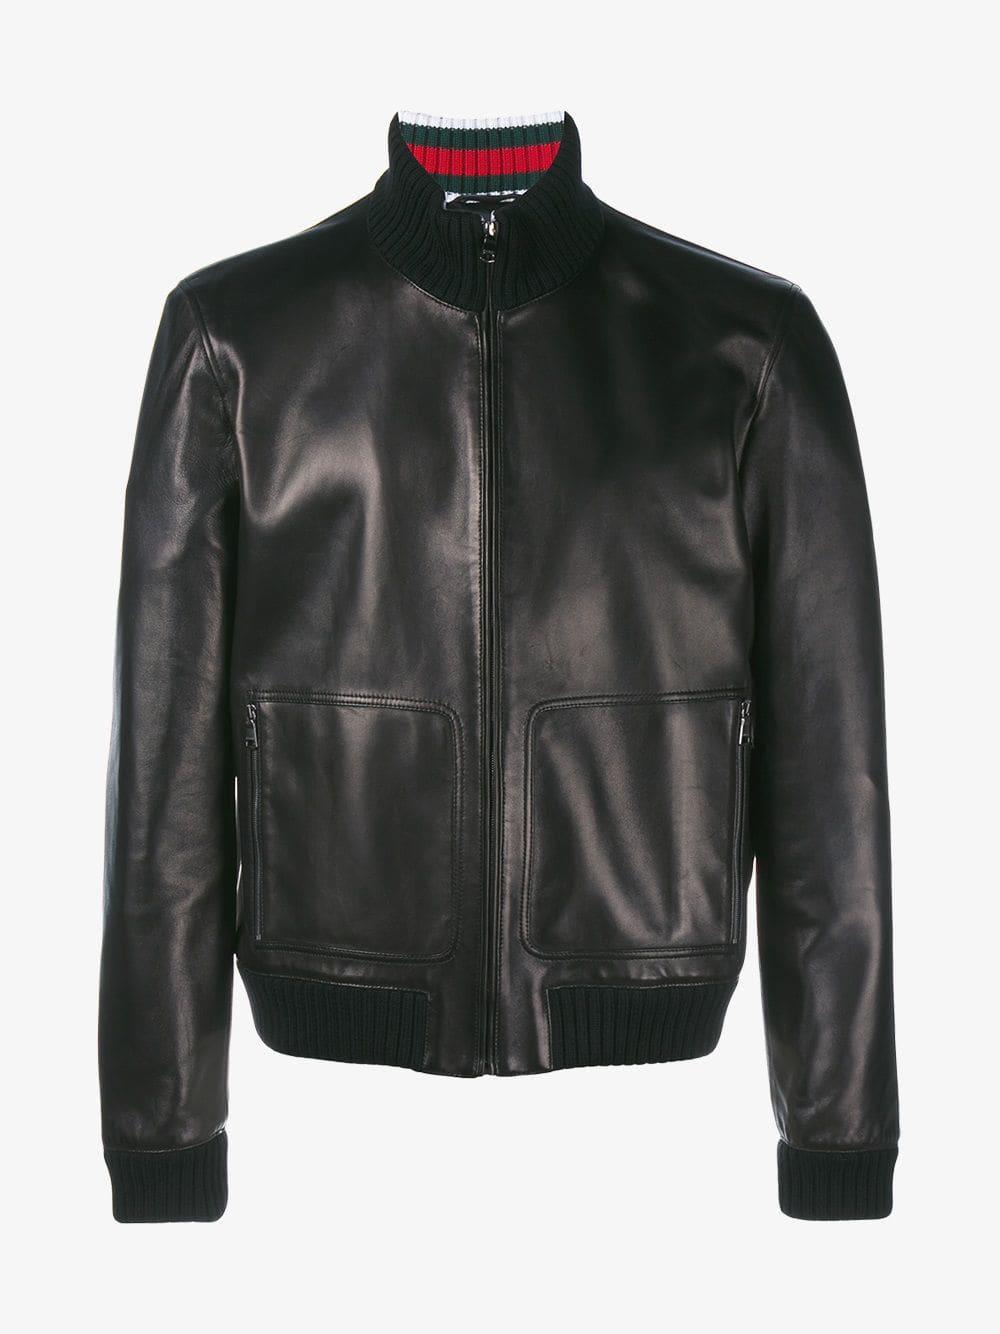 Gucci Leather Bomber Jacket in Black for Men - Lyst